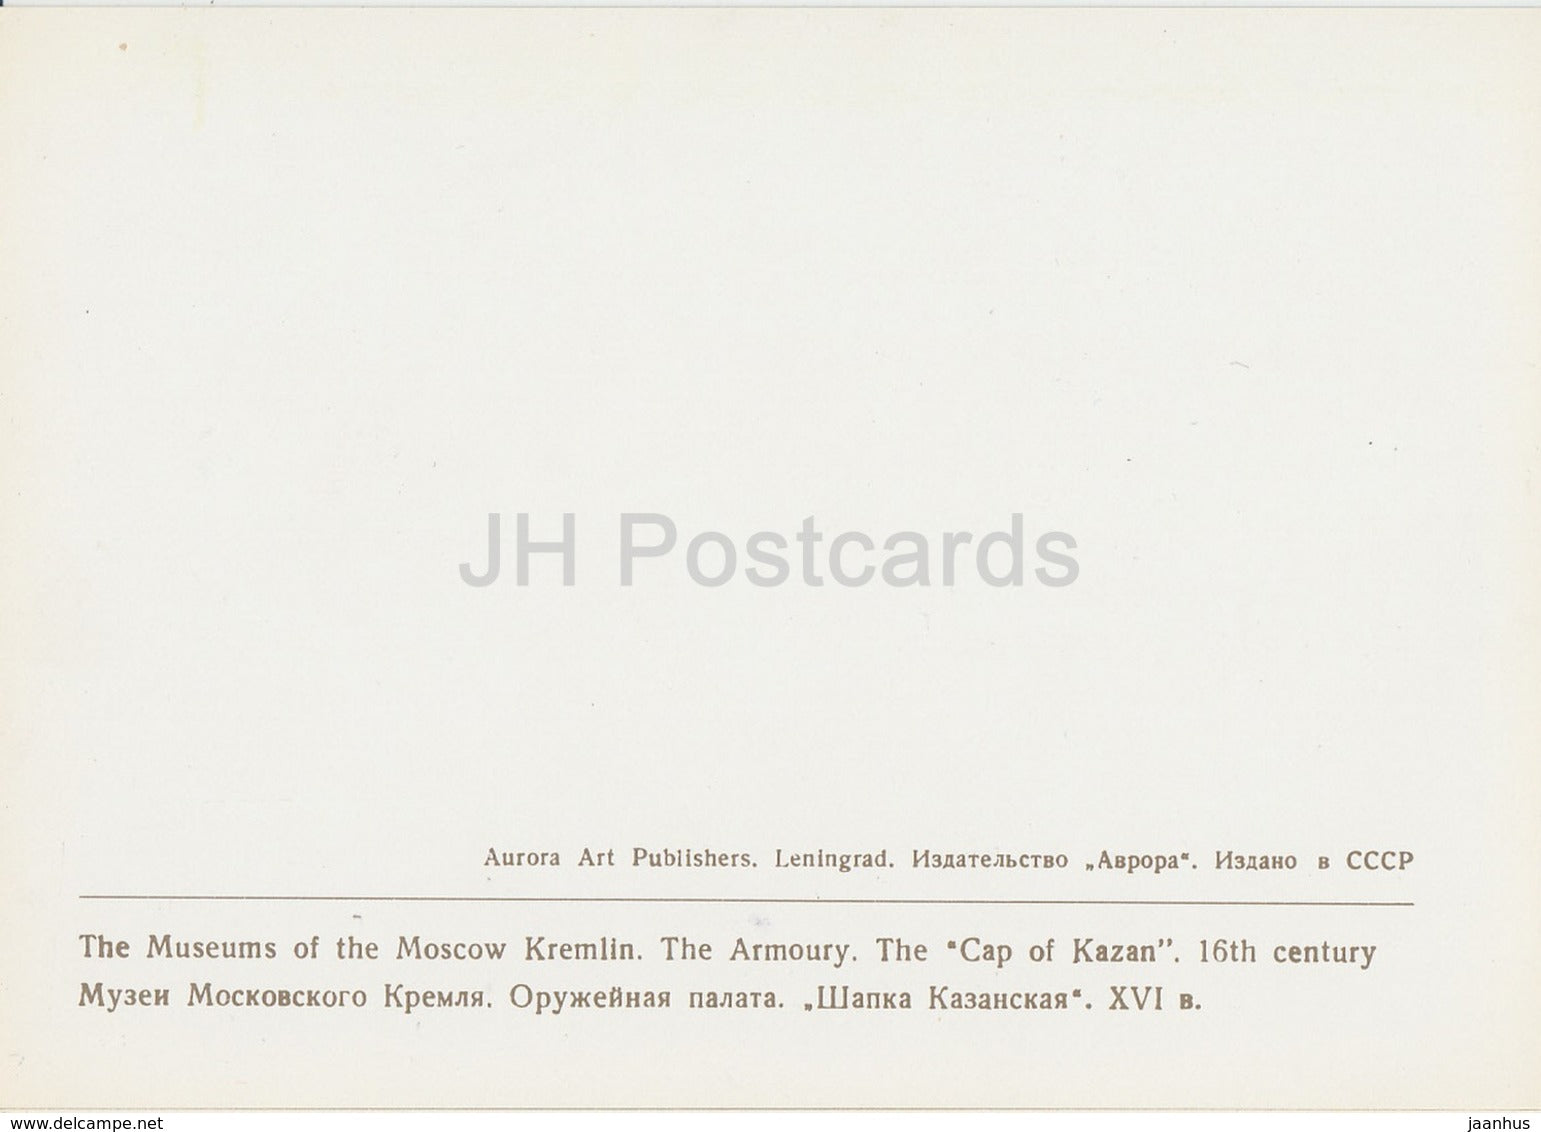 The Armoury - The Cap of Kazan - Moscow Kremlin Museums - 1976 - Russia USSR - unused - JH Postcards